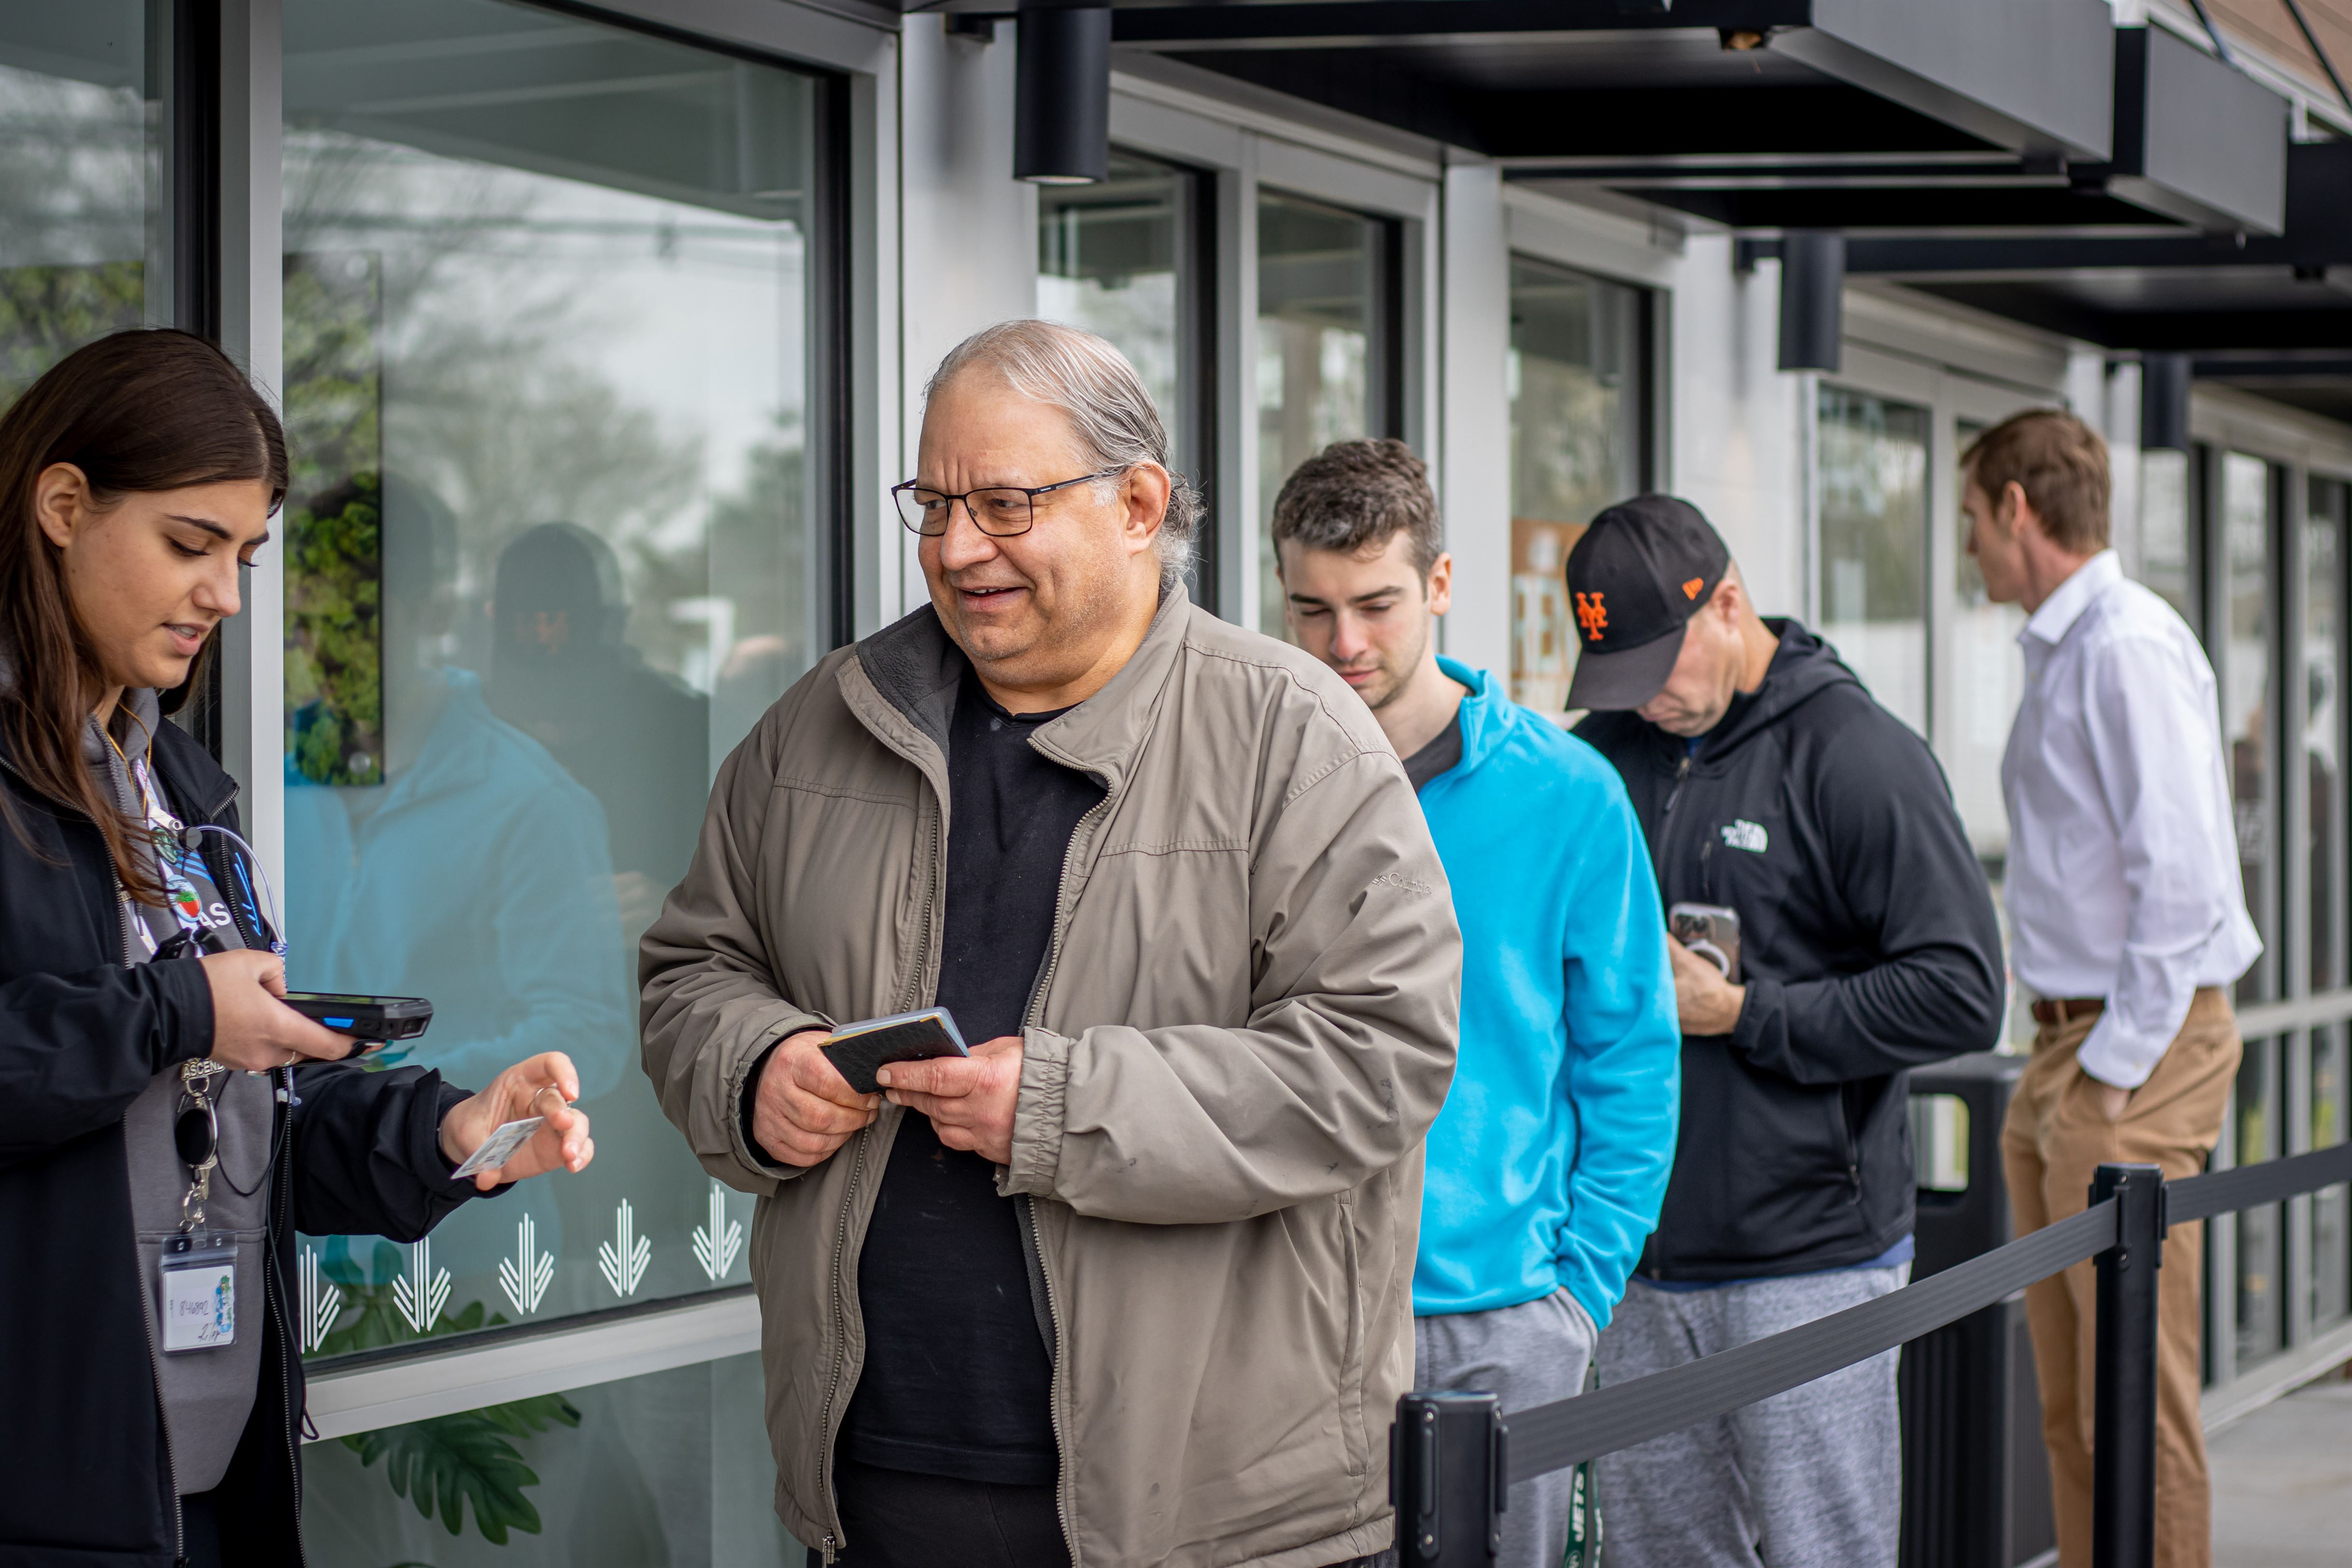 Costumers wait as they have their ID checked and scanned before entering the store. John LaRosa | The Montclarion